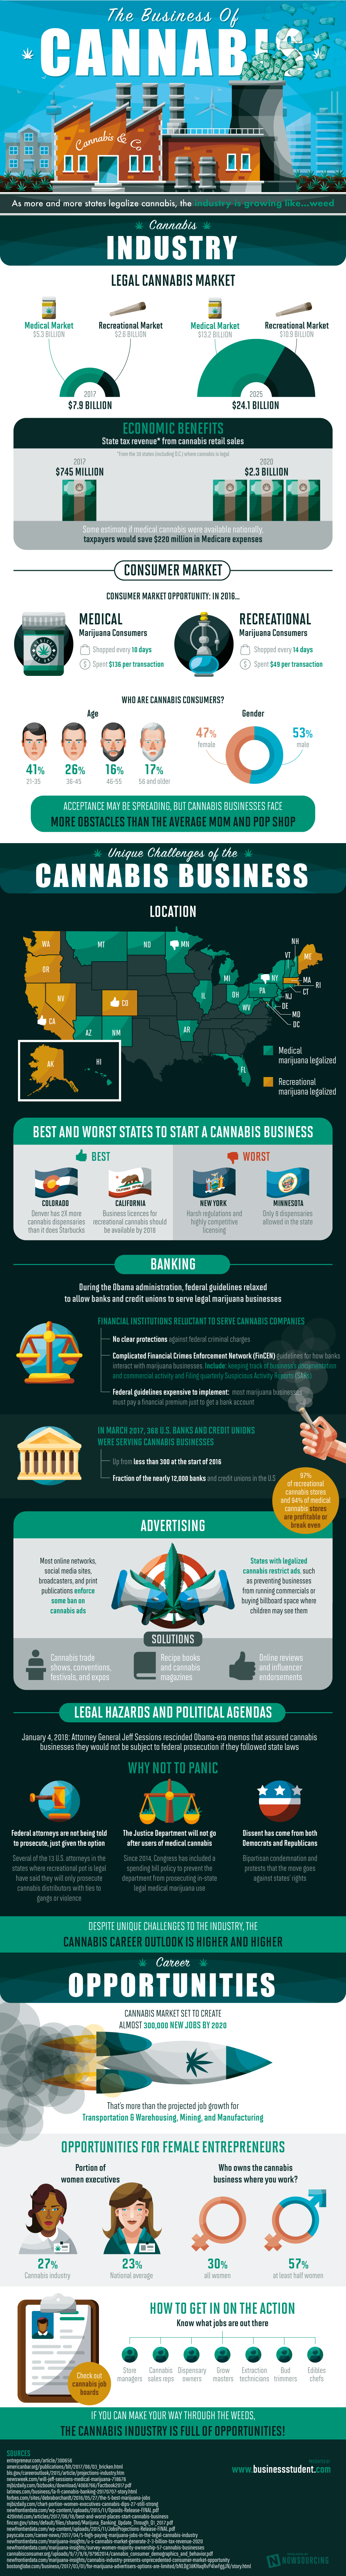 Everything You Wanted to Know About the Business of Cannabis - Infographic